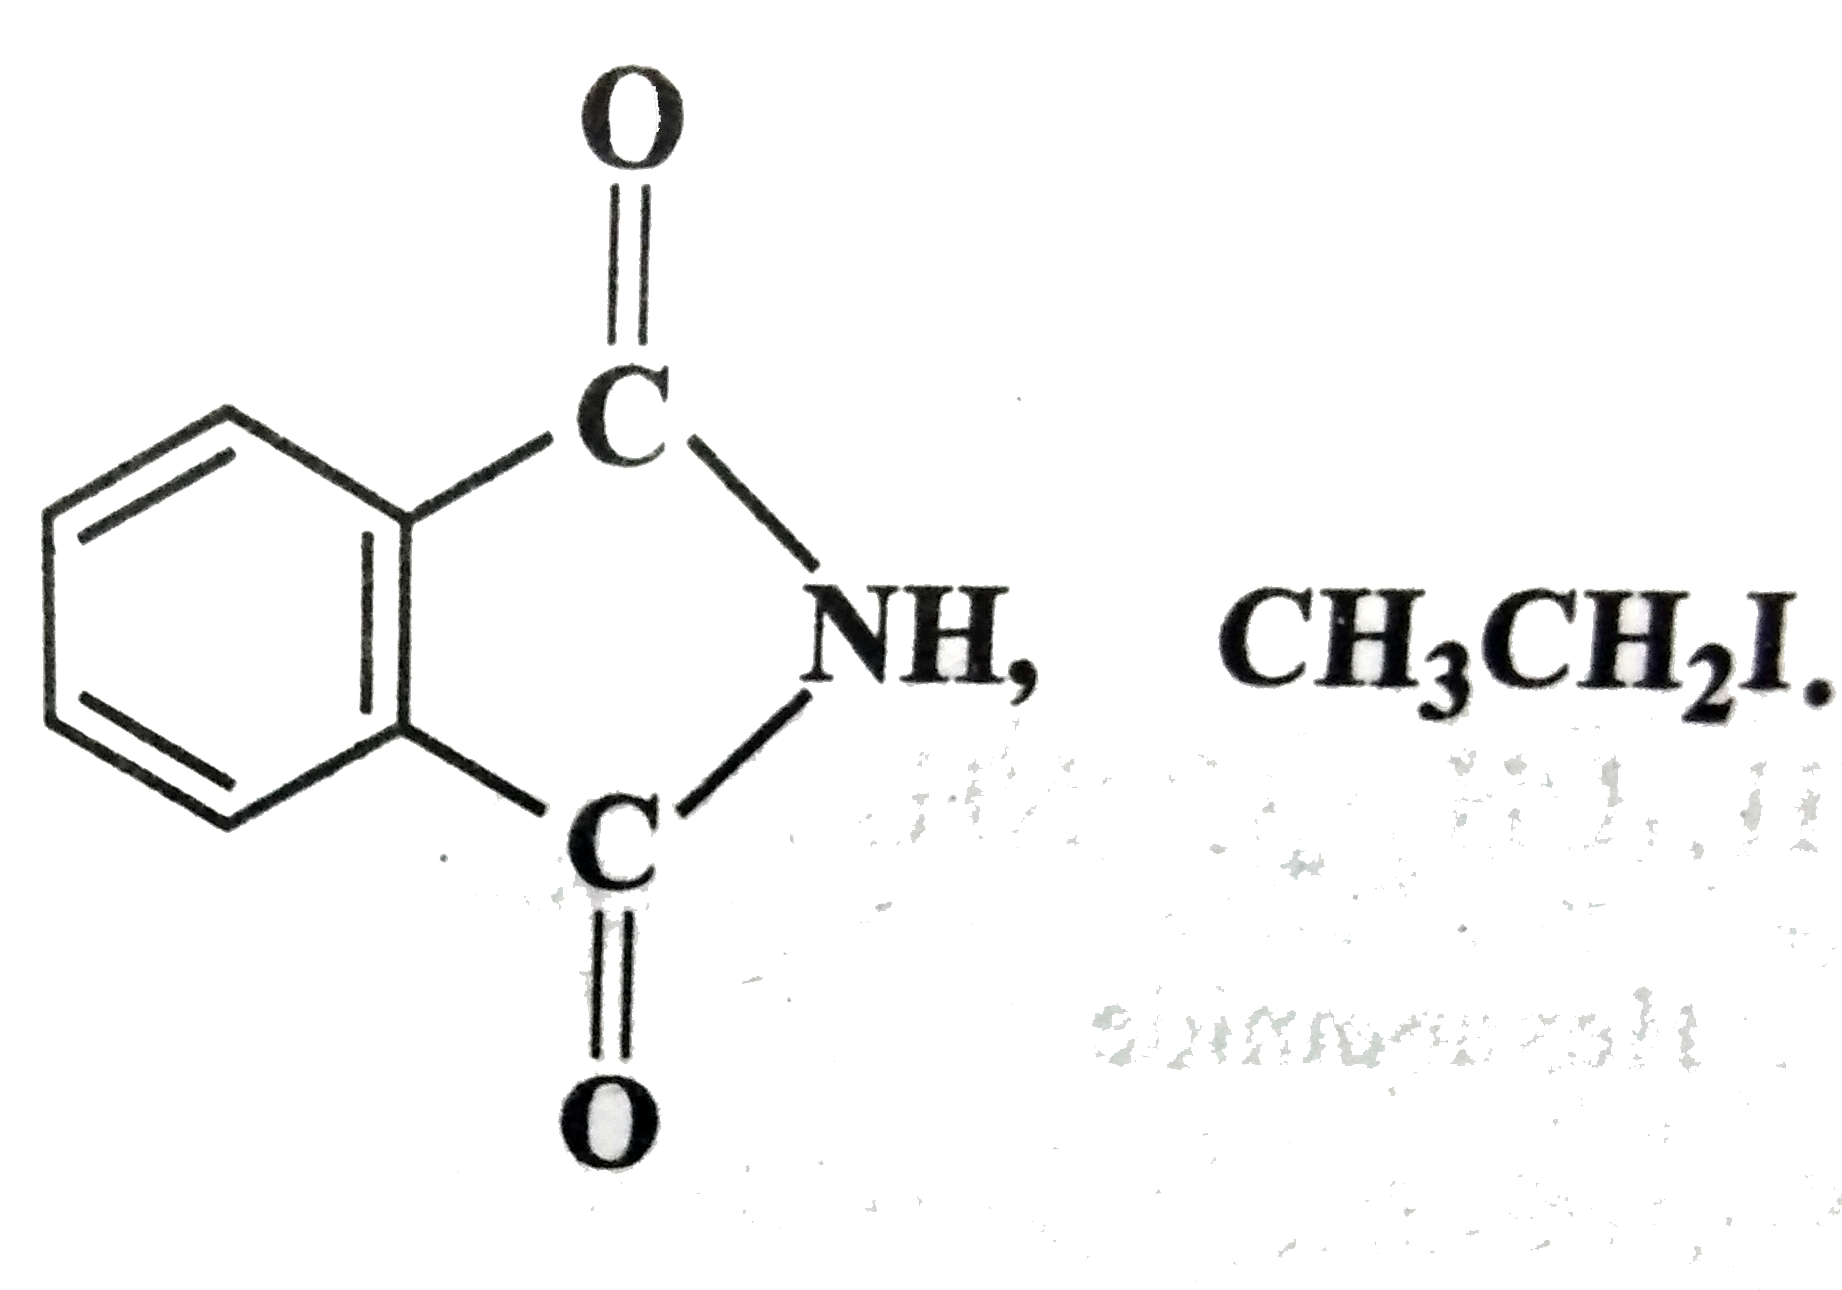 Write arrowhead equations for the preparation of CH(3)CH(2)NH(2) from the following substances:   ethanolic KOH,